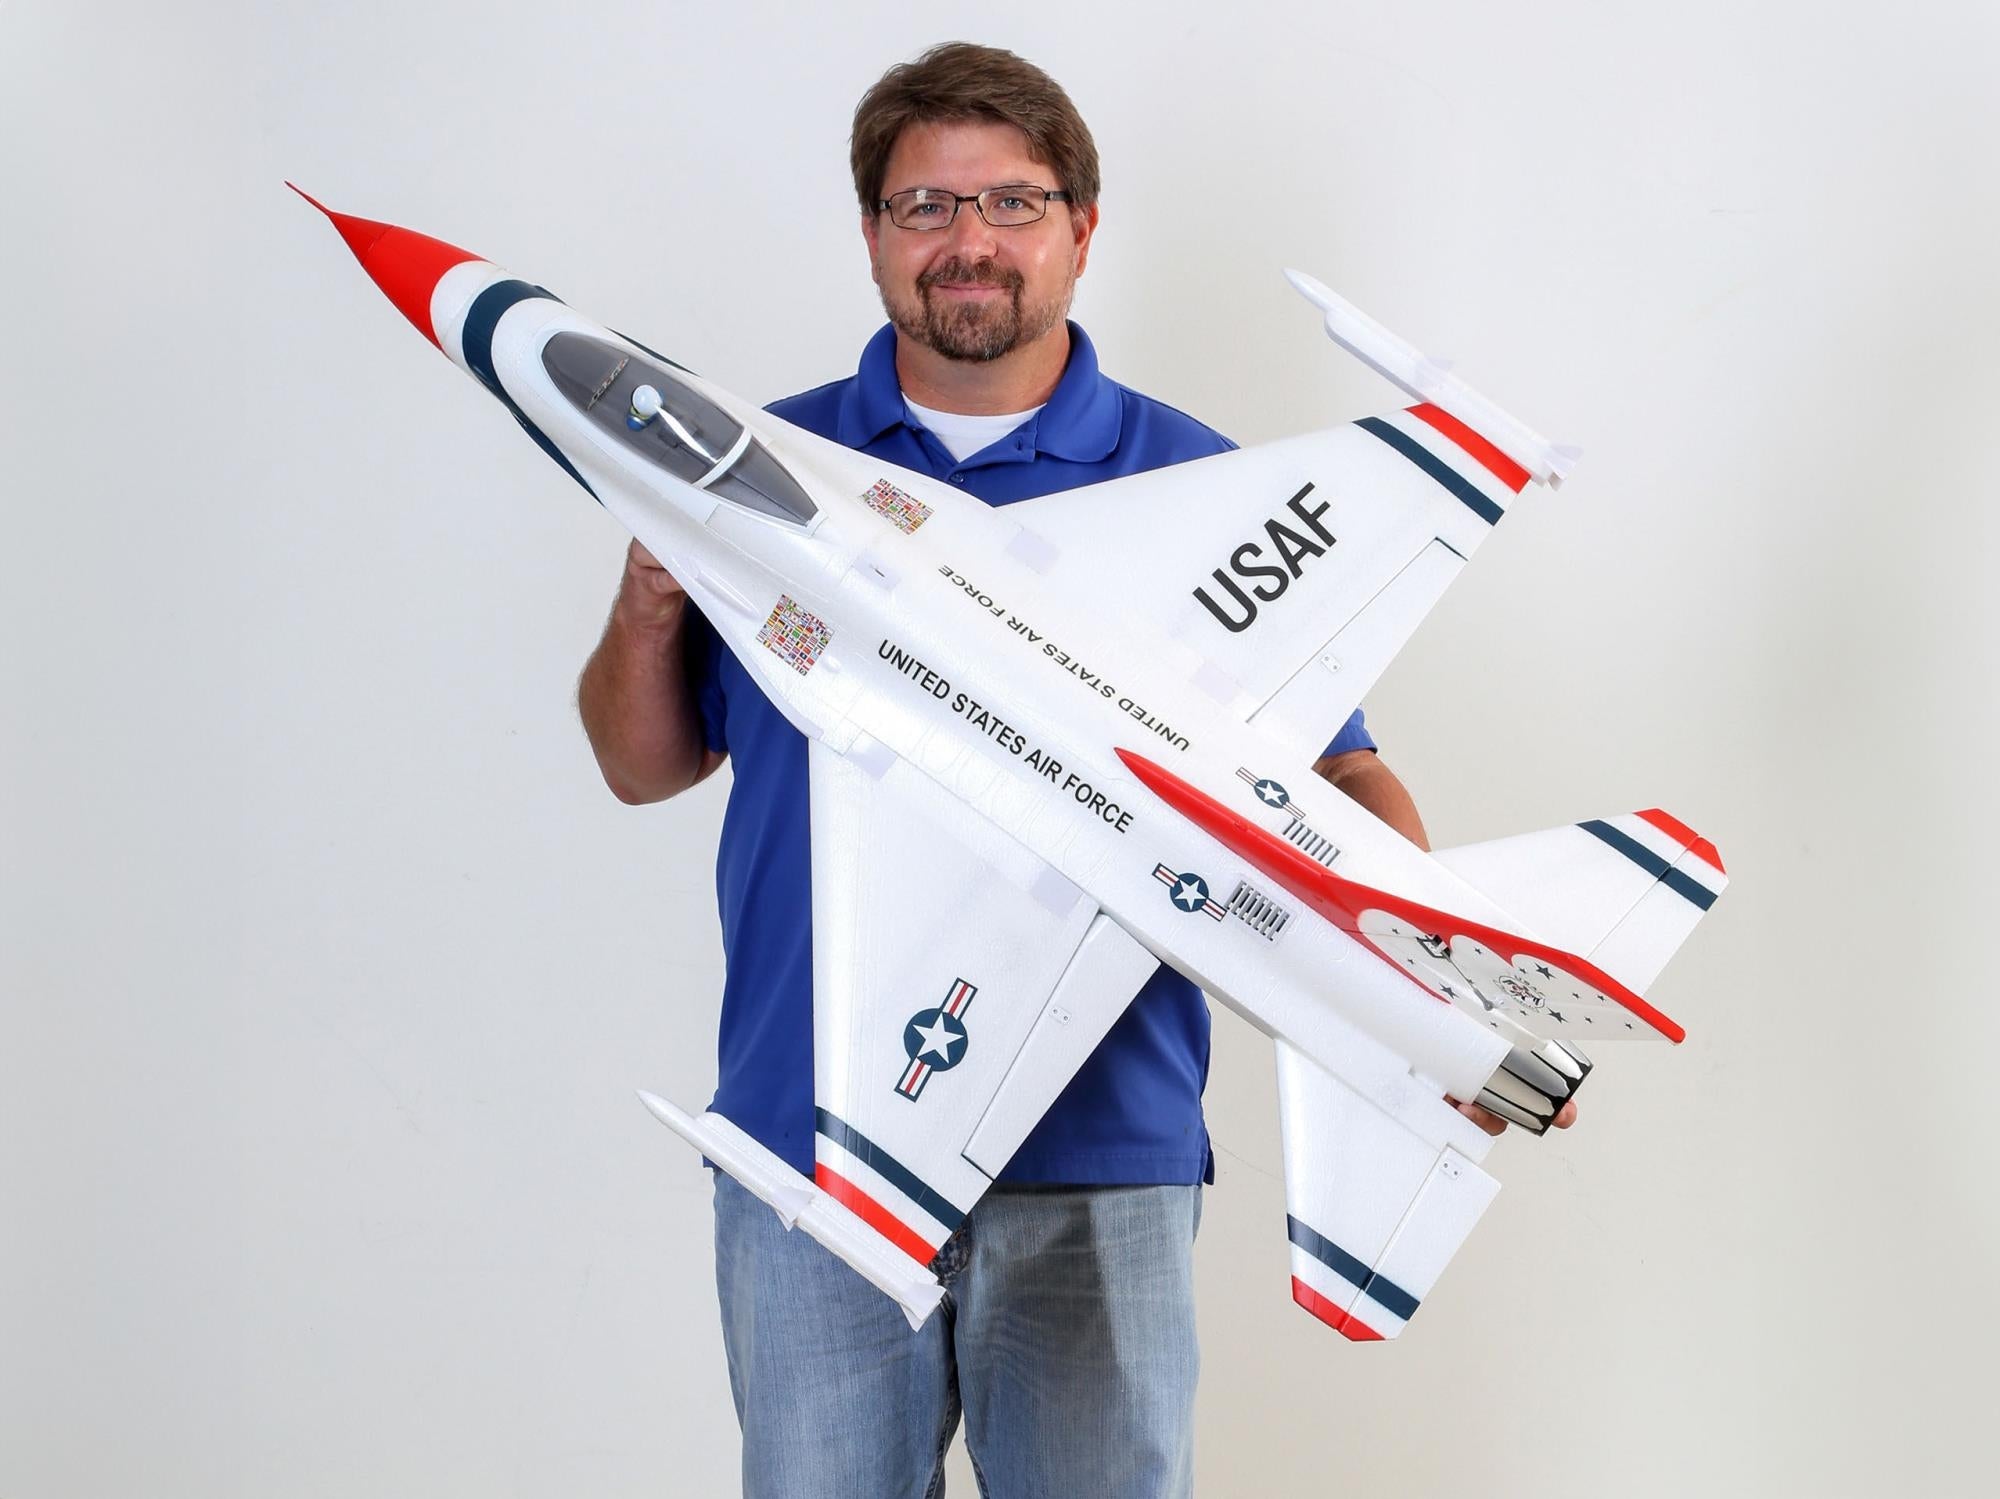 E-Flite F-16 Thunderbirds 70mm EDF Jet BNF Basic with AS3X and SAFE Select EFL178500